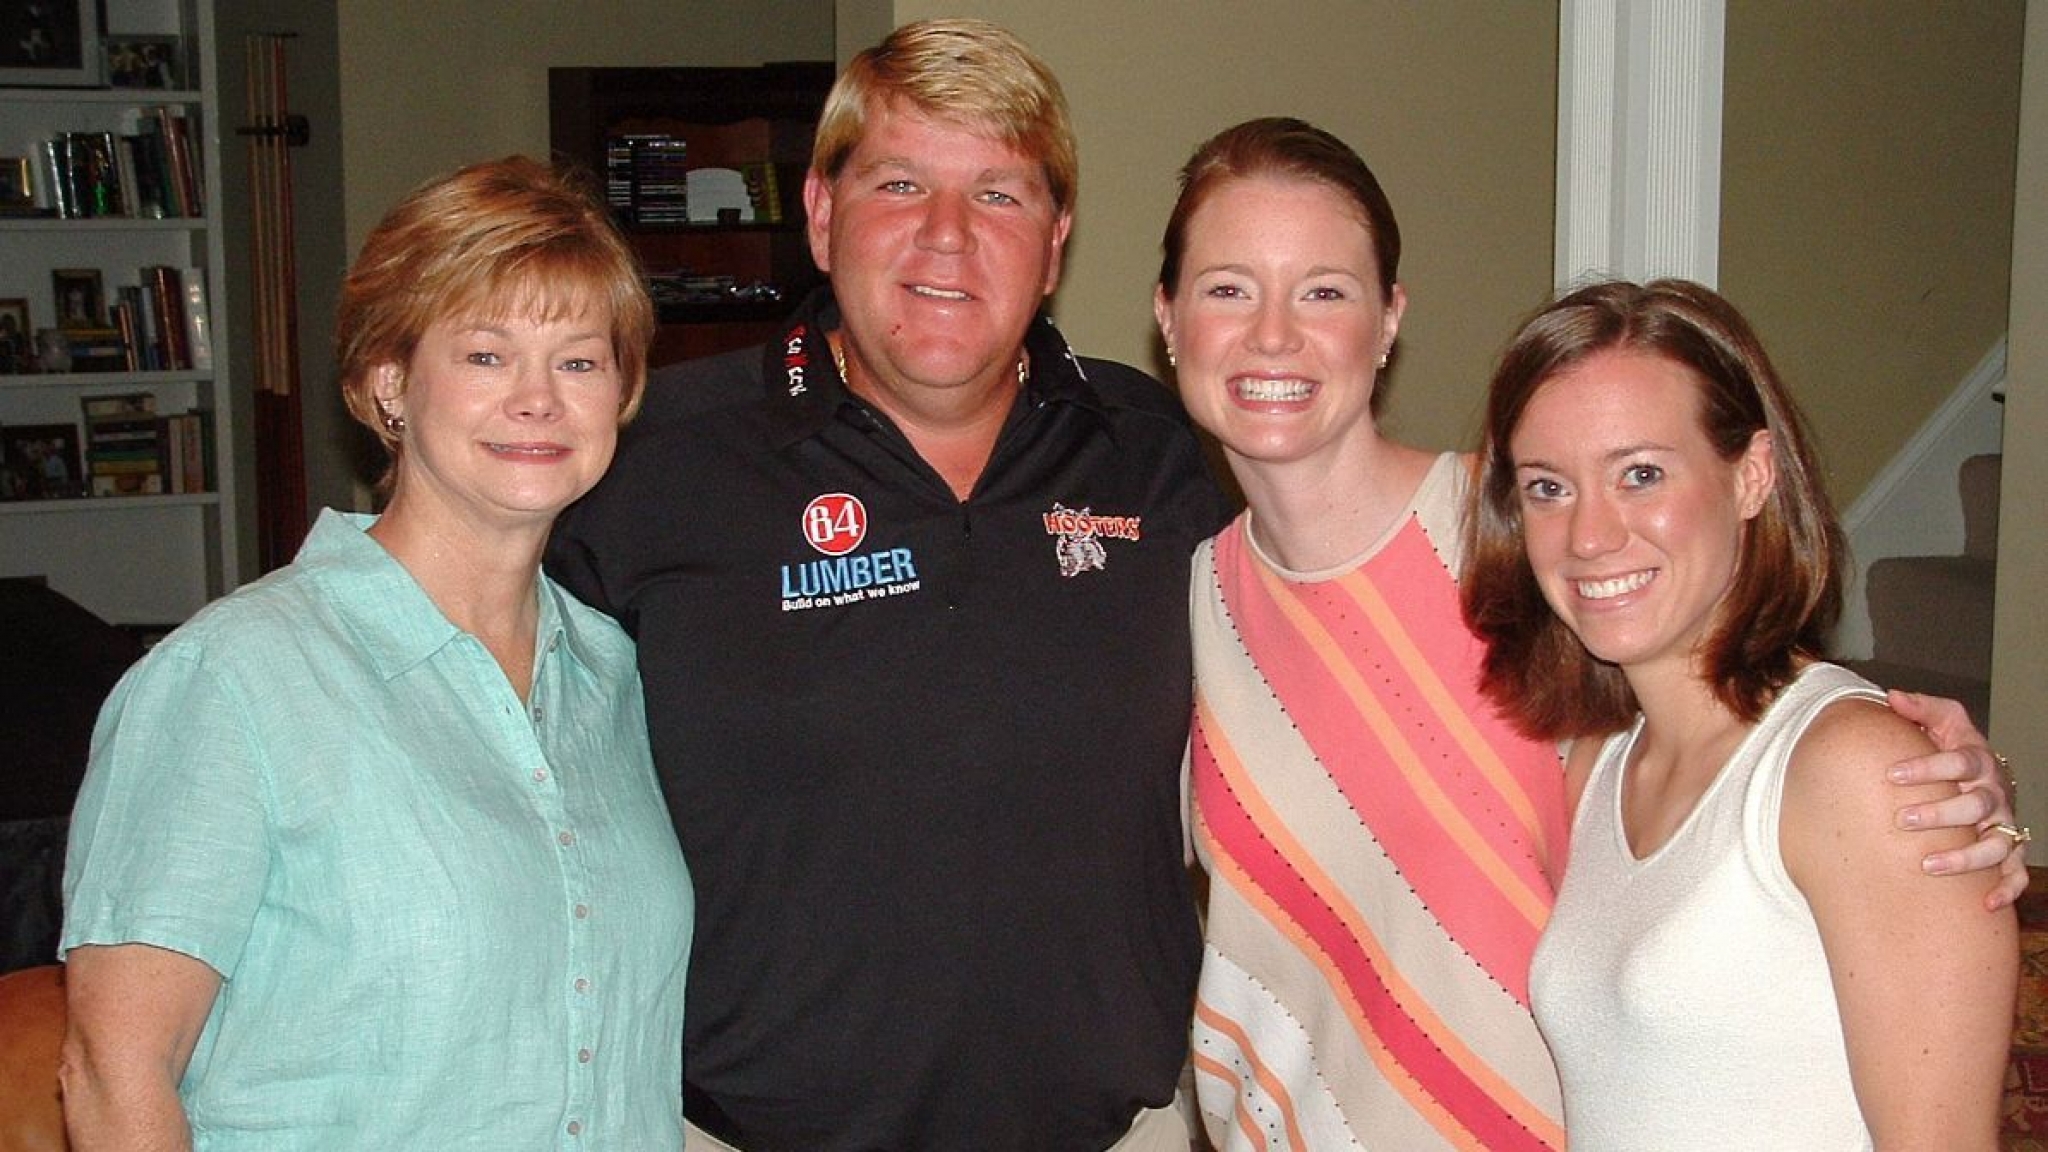 How 30 years ago a then-unknown John Daly helped a family dealing with tragedy